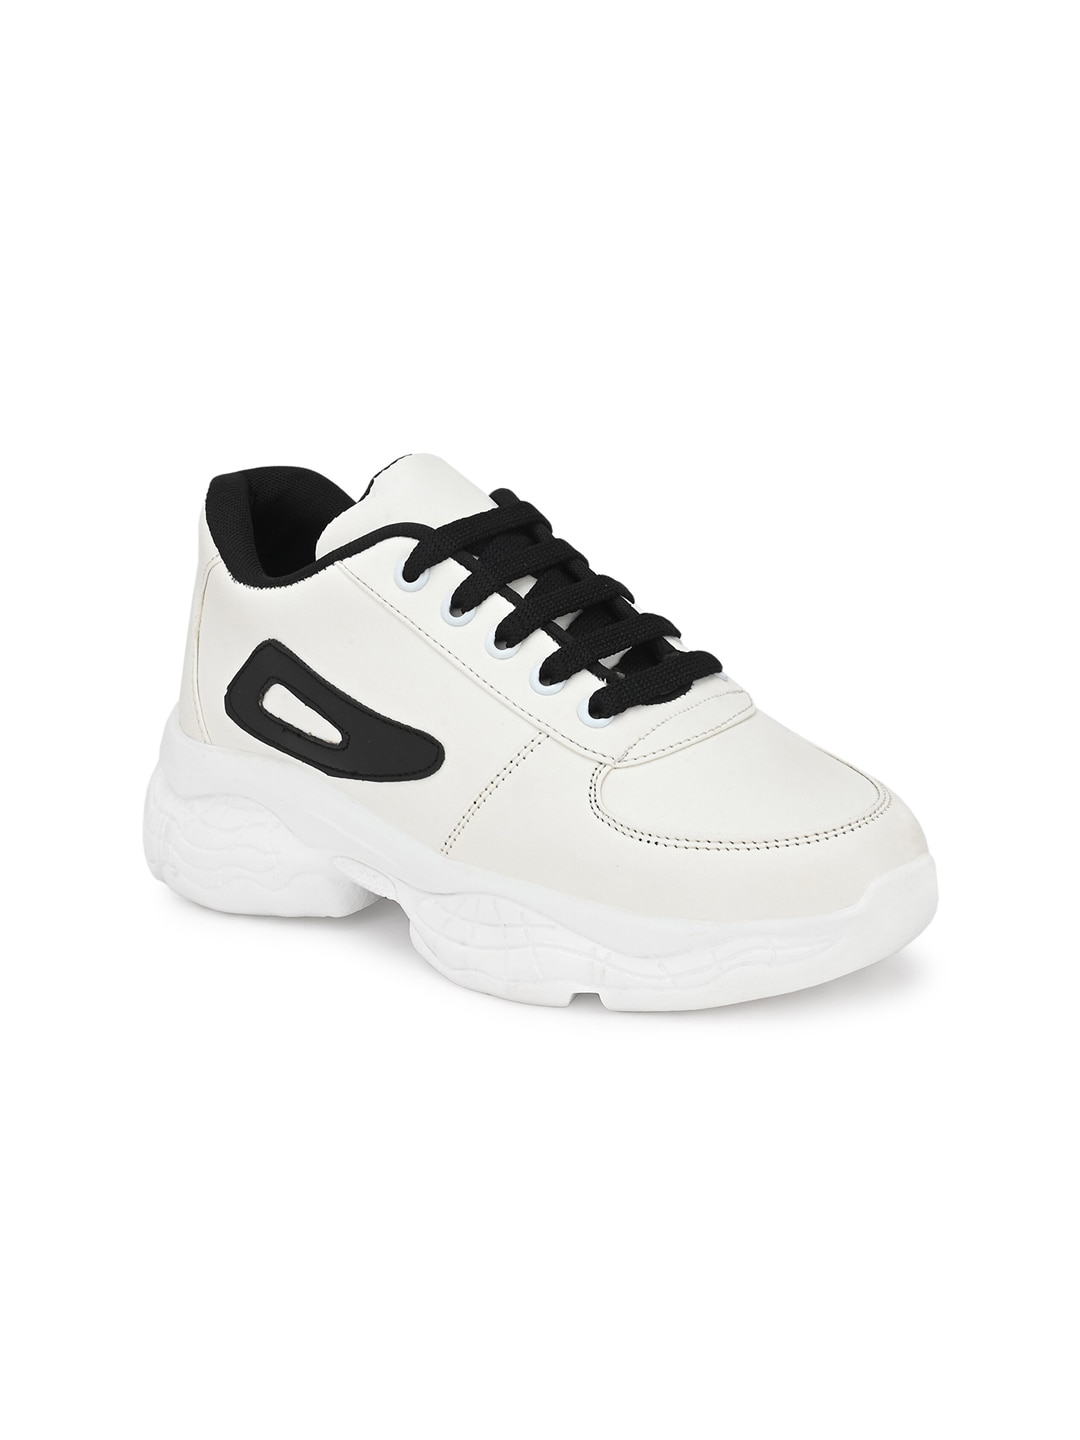 BOOTCO Women White Sneakers Price in India